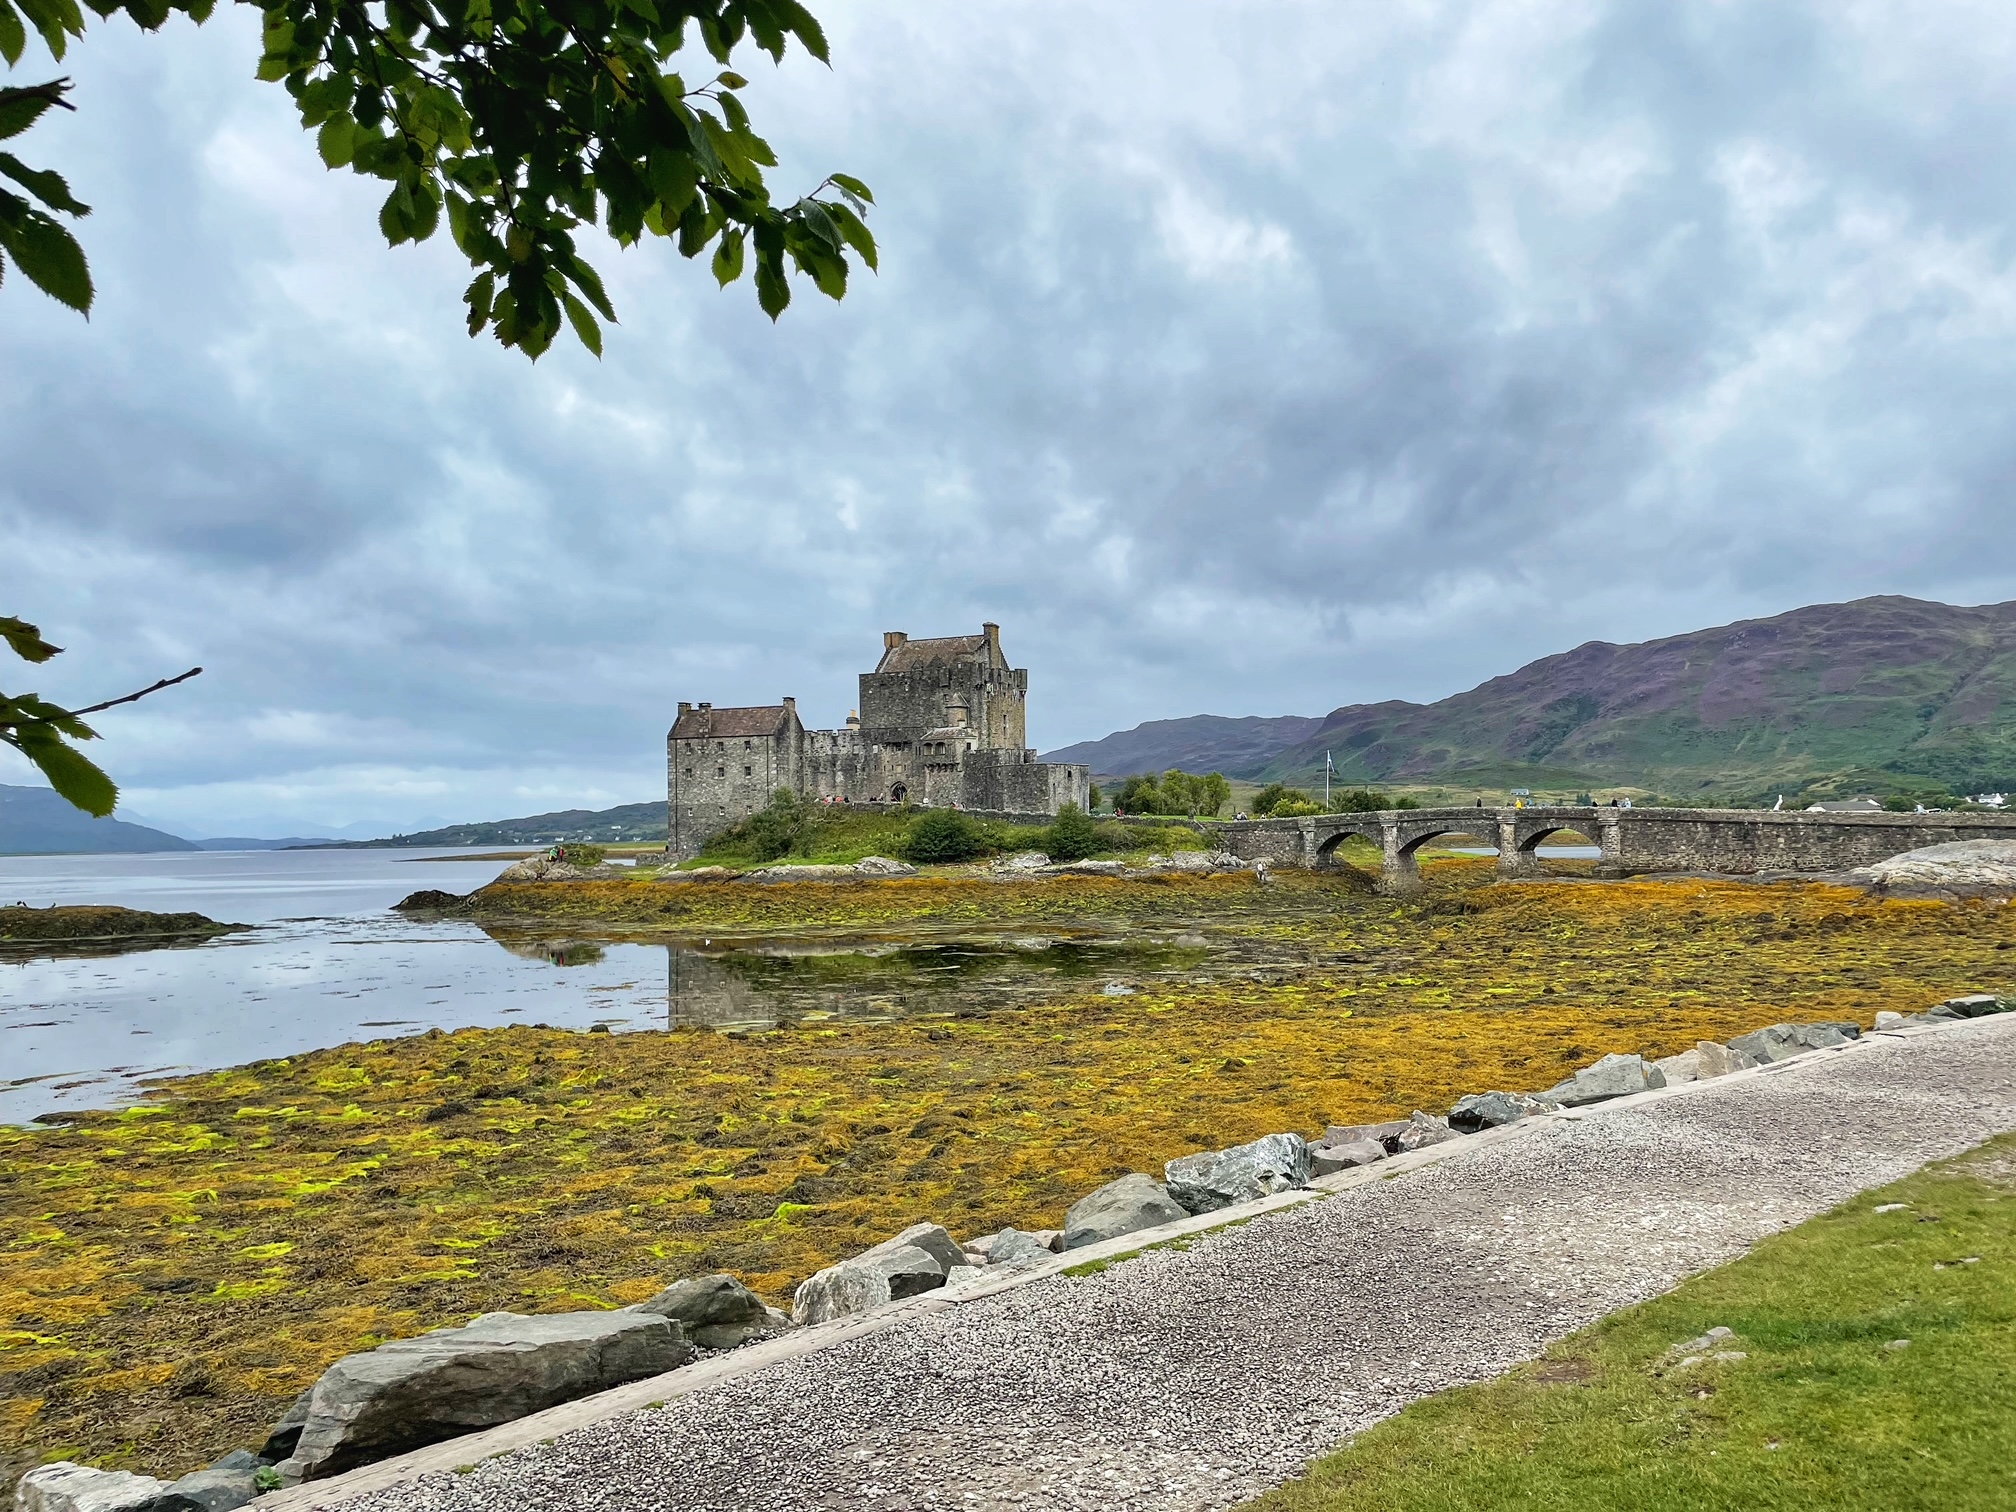 Eilean Donan Castle is one of Scotland's most photographed castle. It's been in several films. It's a must stop on the way to Skye.